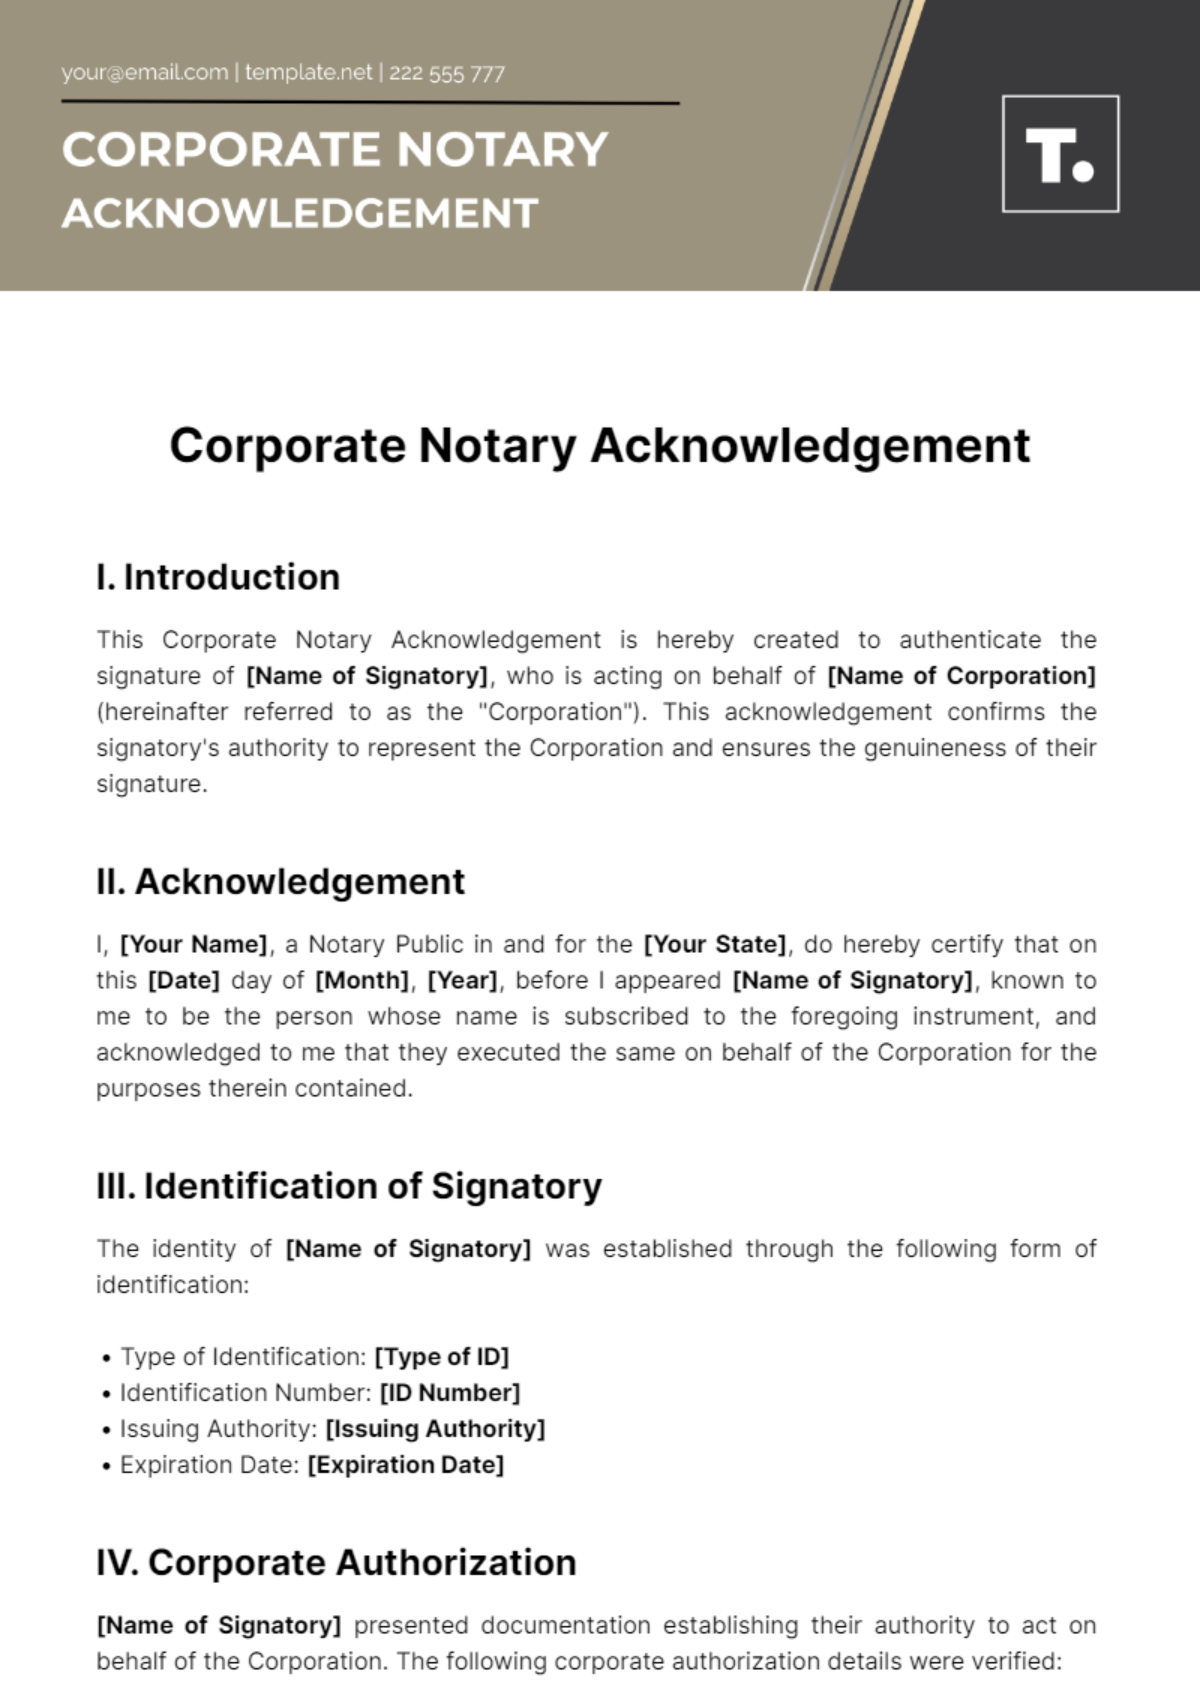 Free Corporate Notary Acknowledgement Template